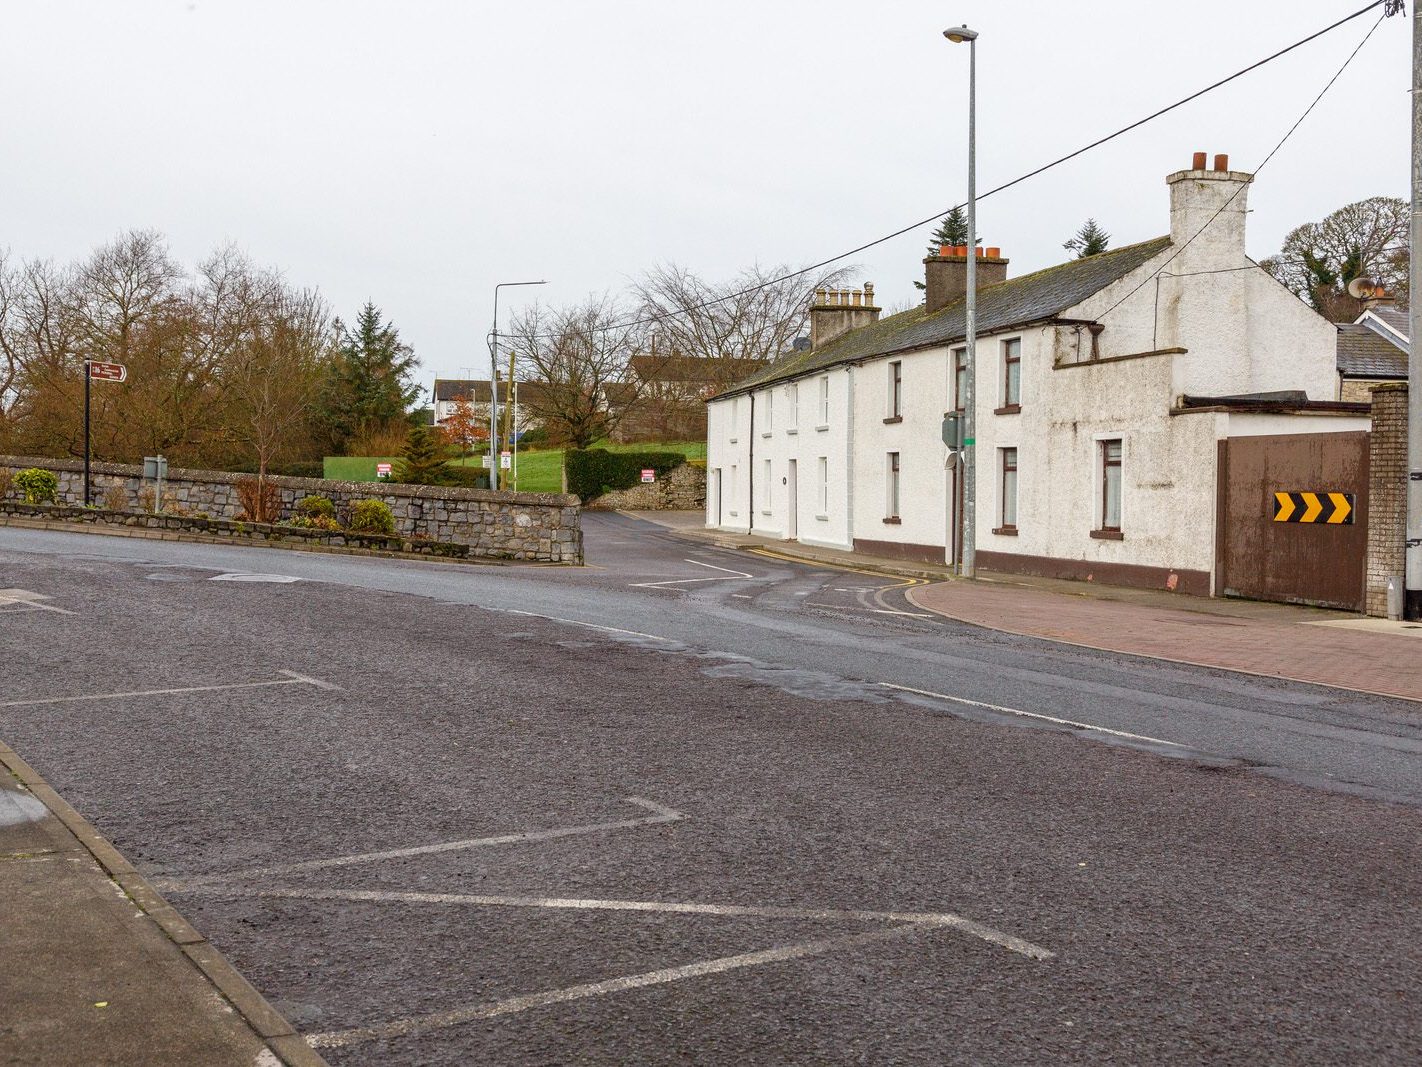 WATERGATE STREET AND WATERGATE BRIDGE [THE TOWN OF TRIM IN COUNTY MEATH]-226454-1